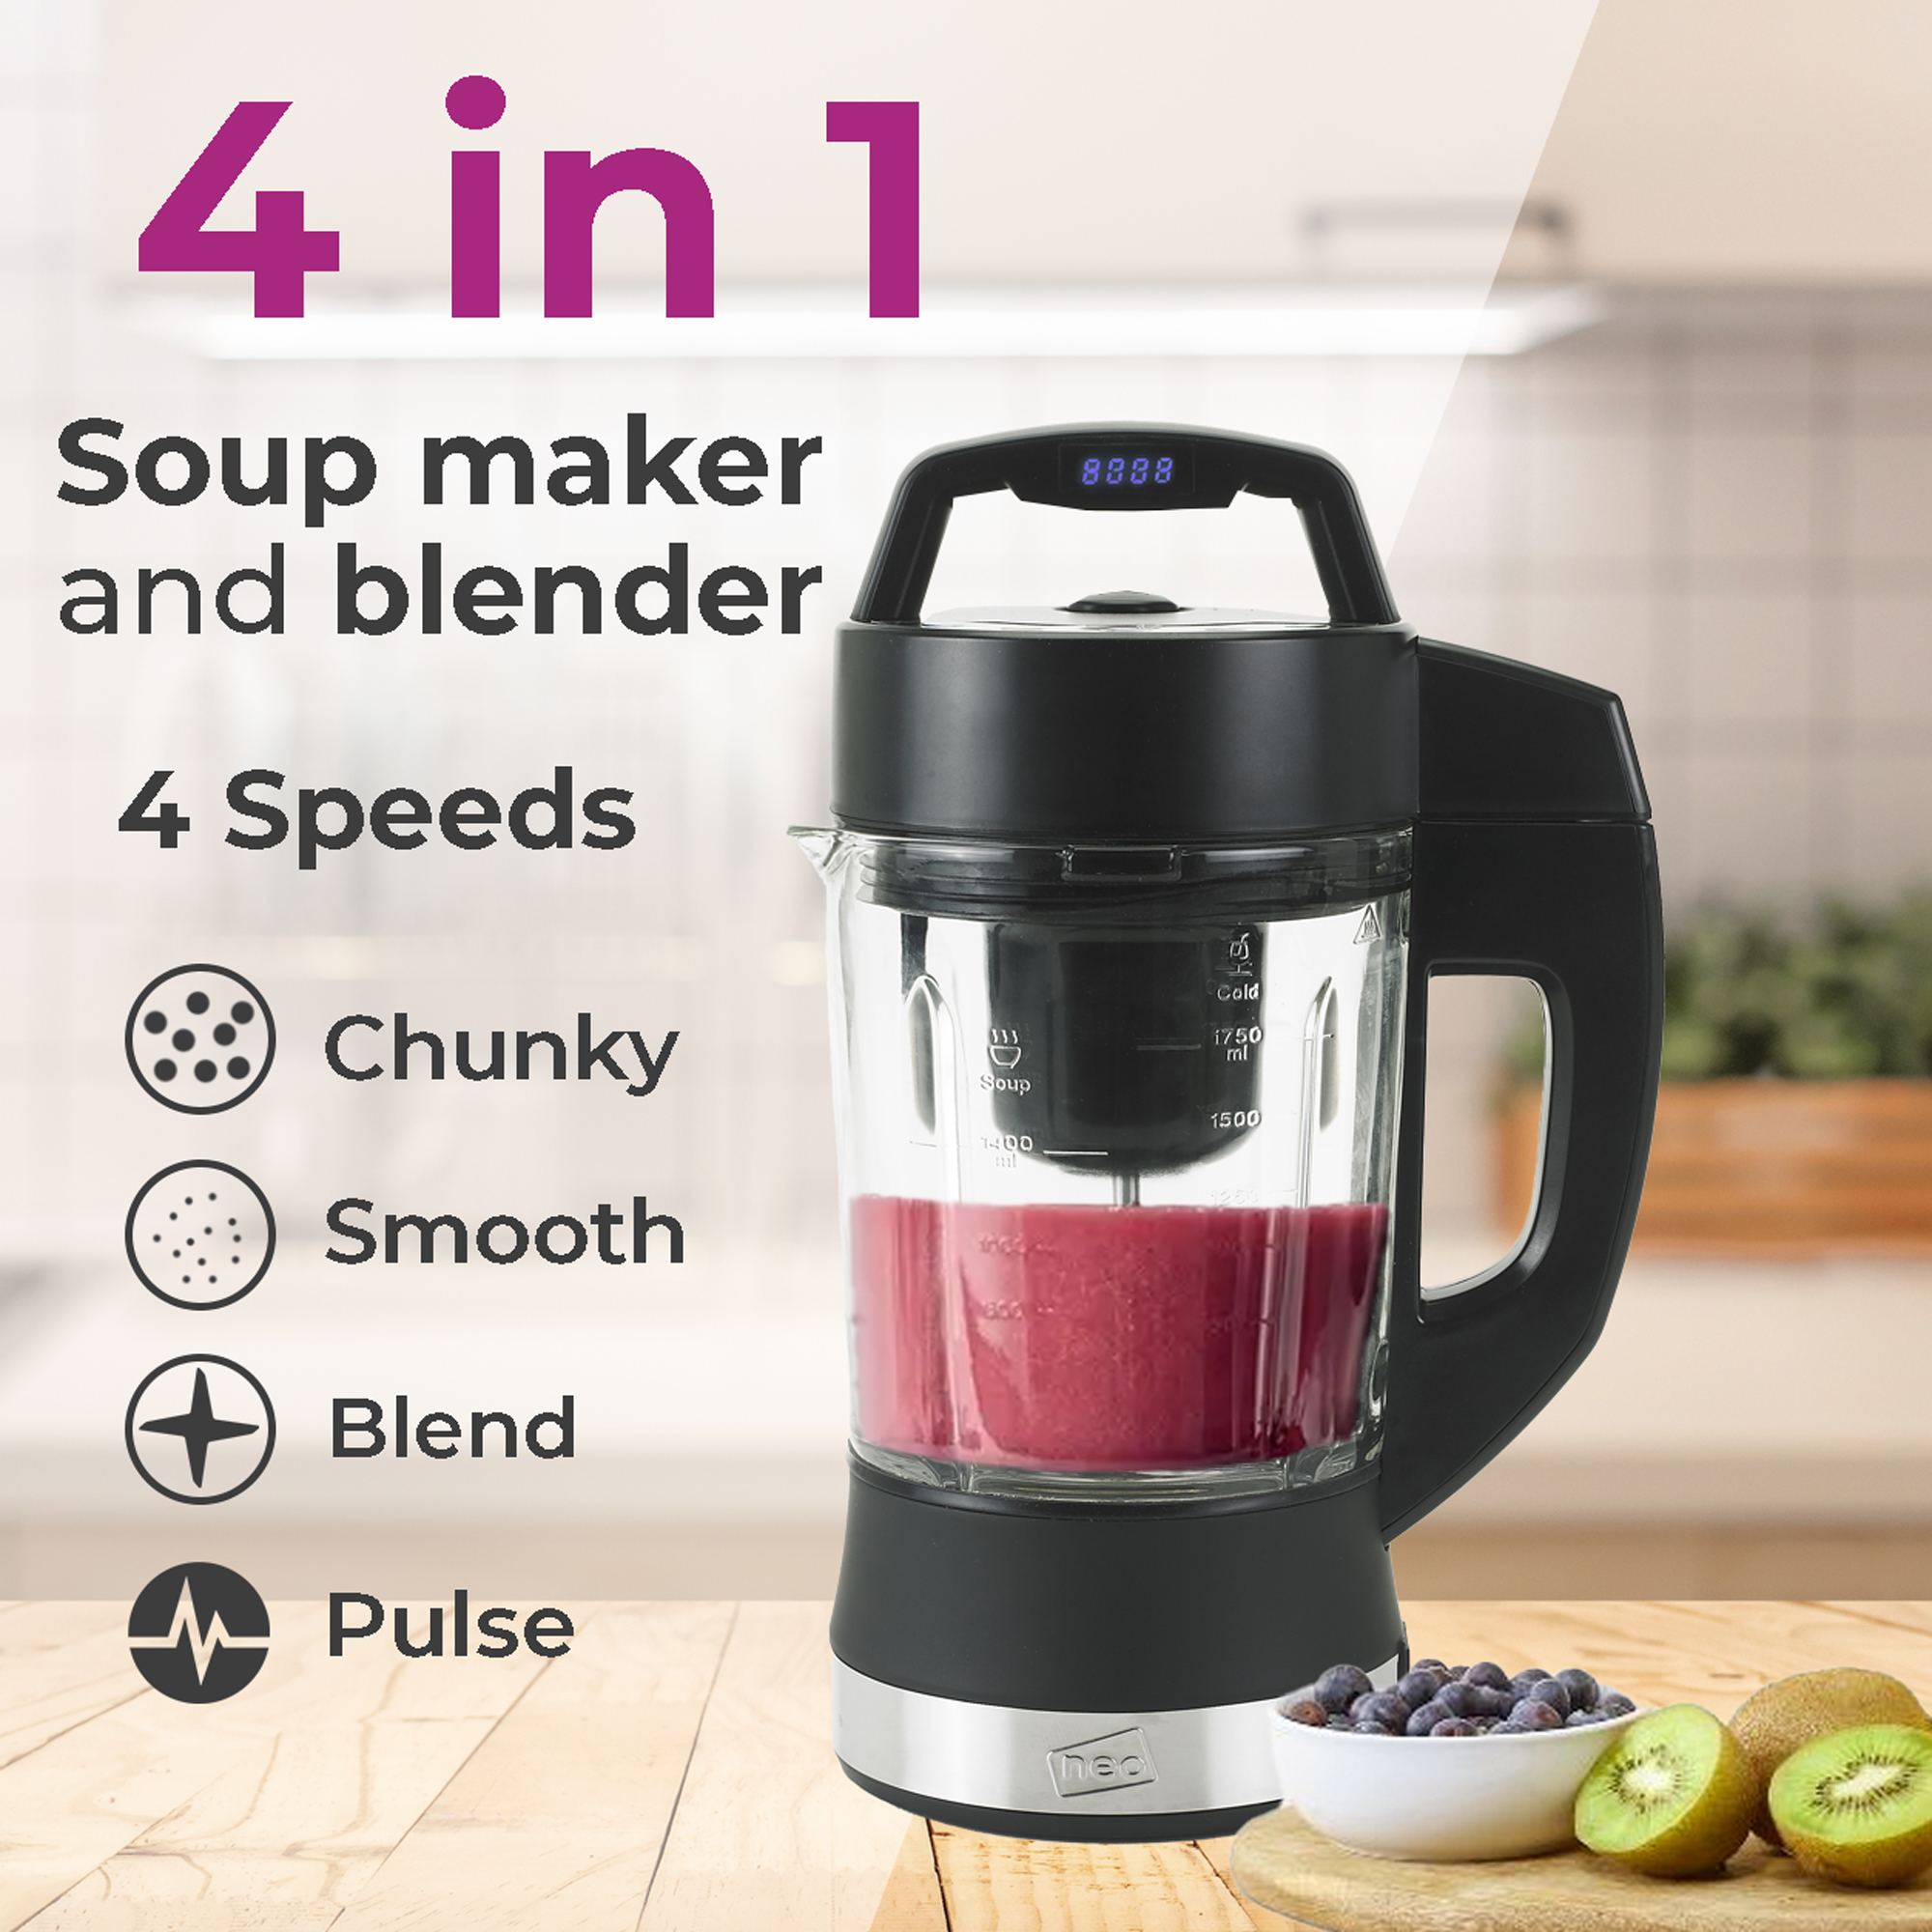 bathivy Soup Maker, Automatical Multi-Function Fresh Soup and Smoothie Make  Machine | 2 Liters, 6 Functions, Stainless Steel, LED Display | Blend